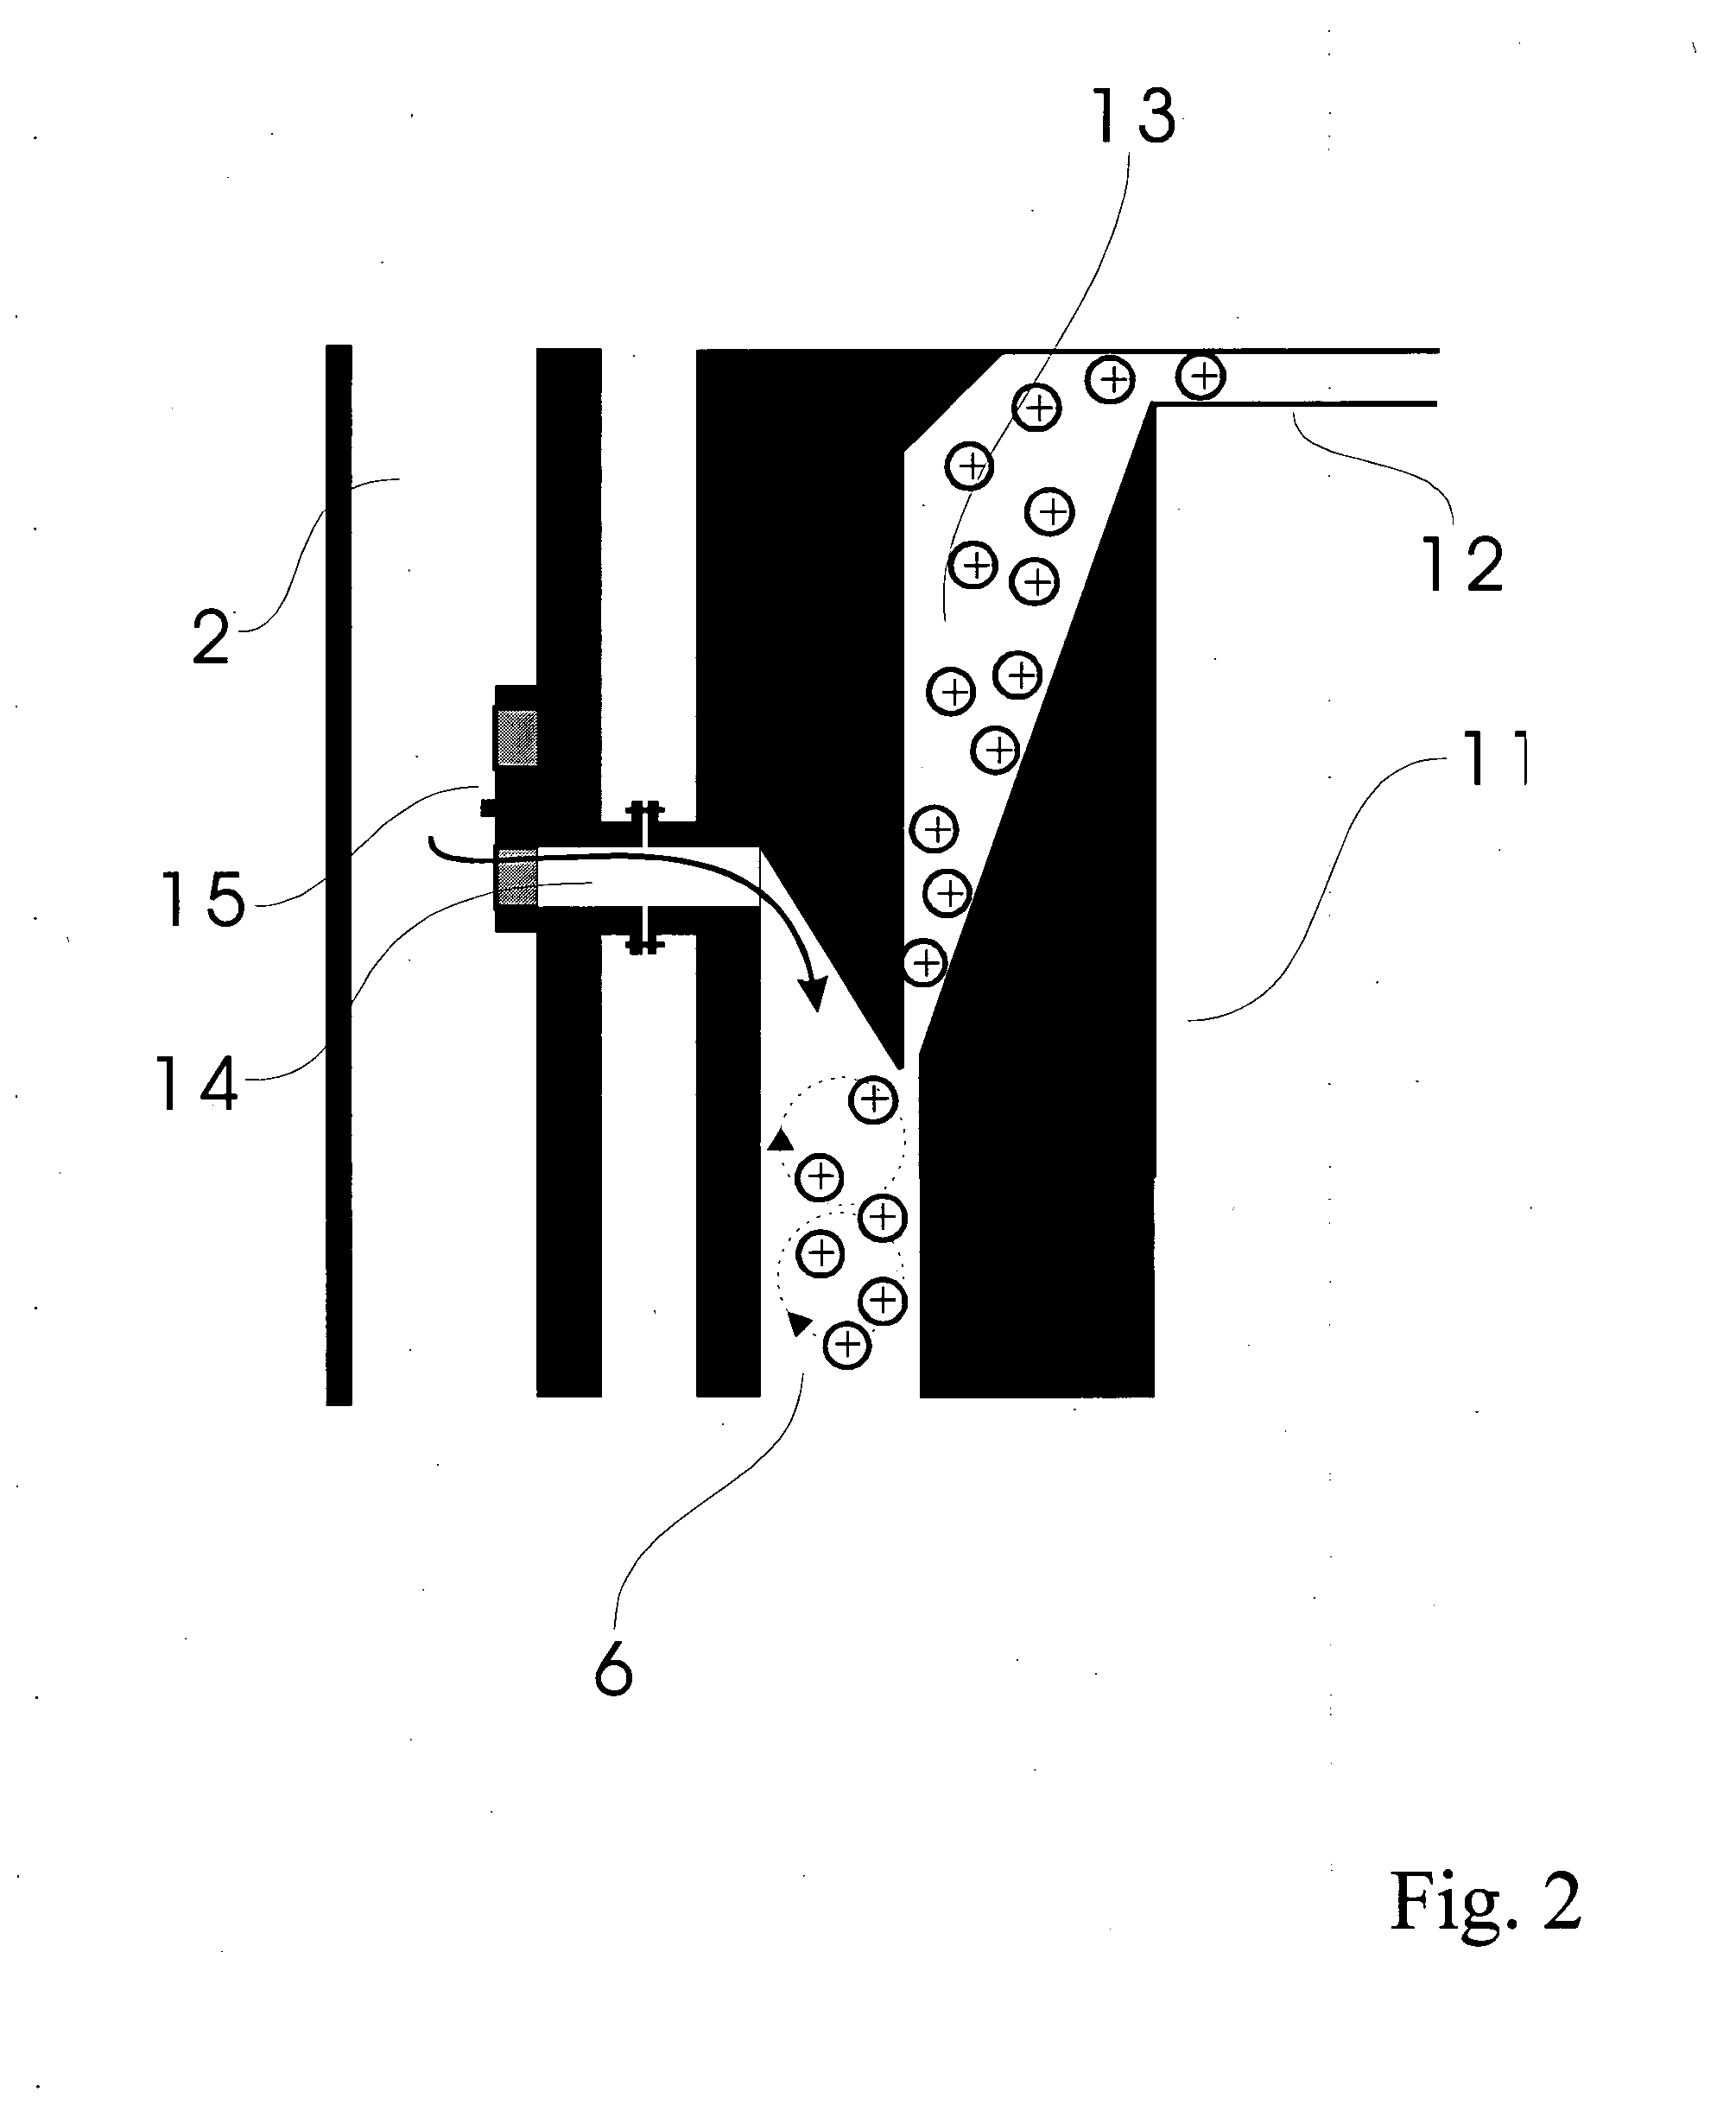 Particle Measurement Process and Apparatus